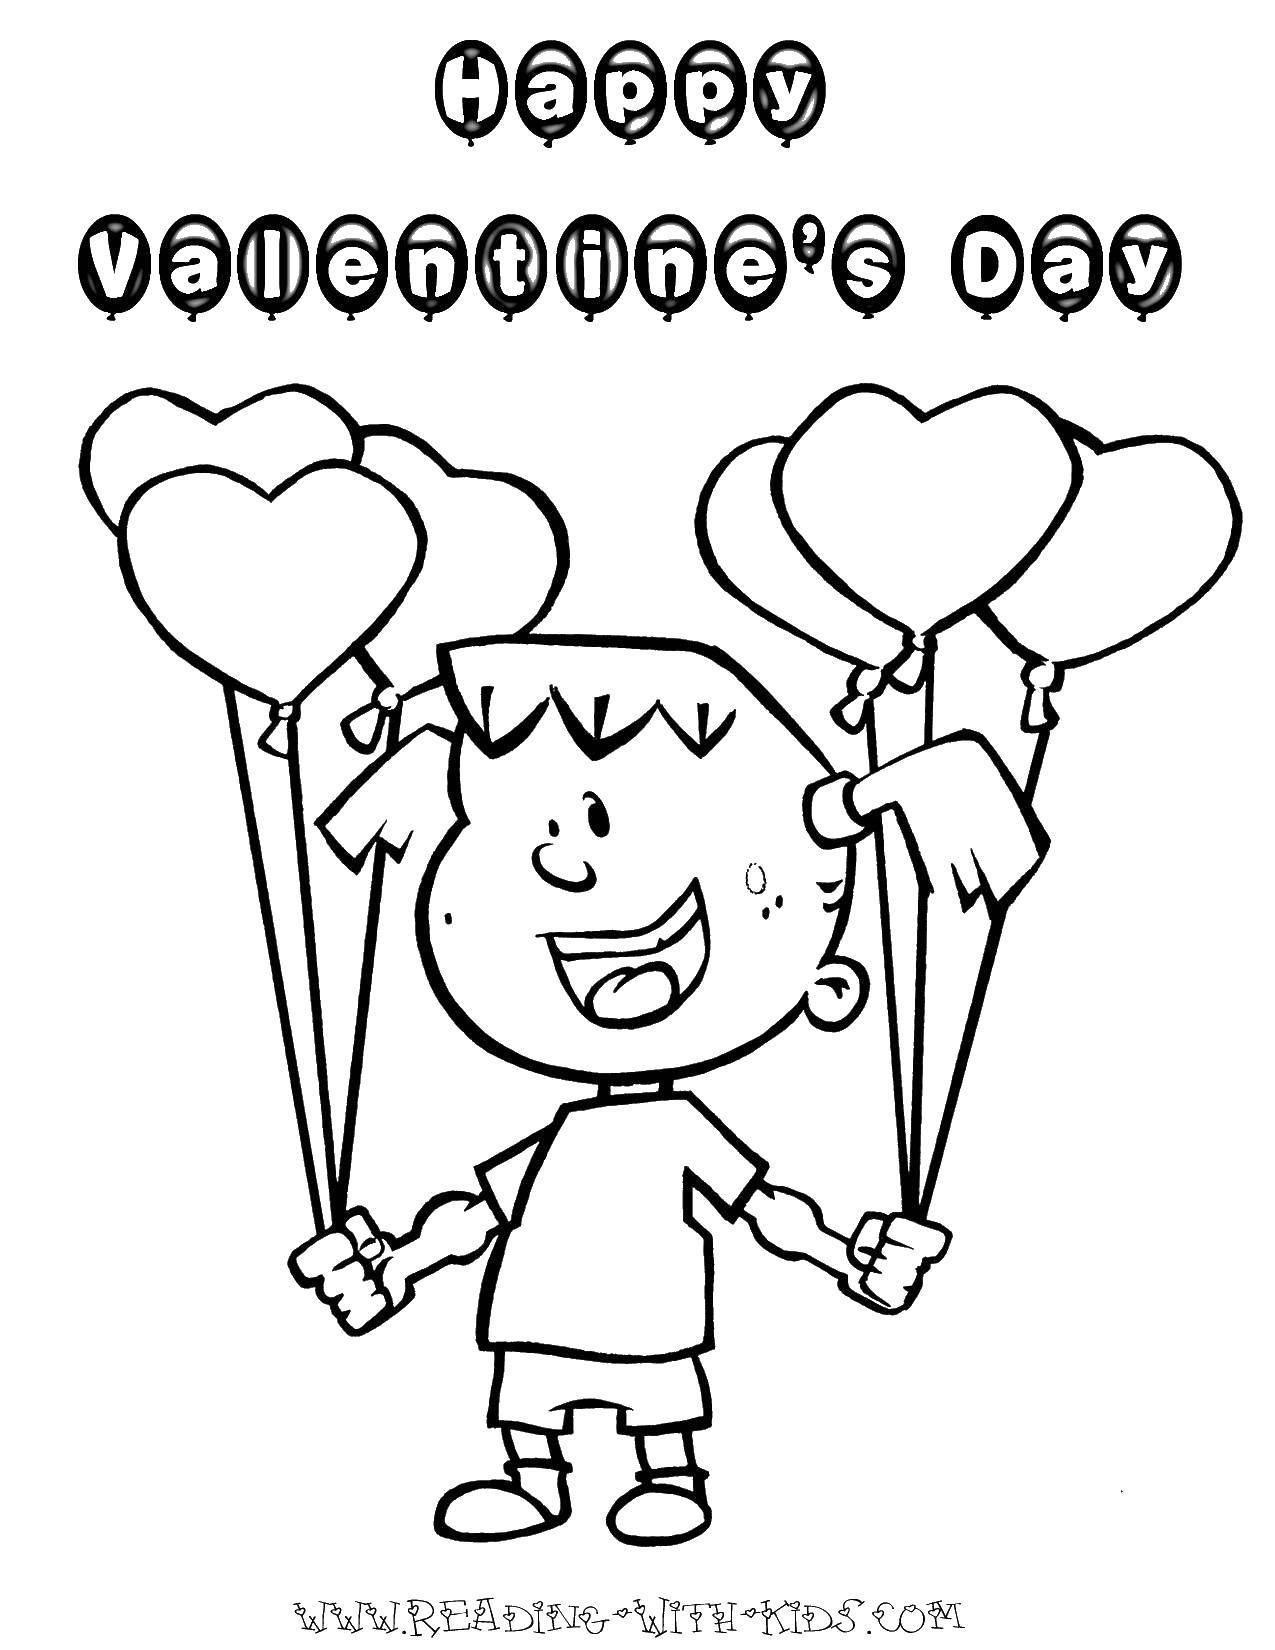 Coloring Girl with balls. Category Valentines day. Tags:  girl , balls.